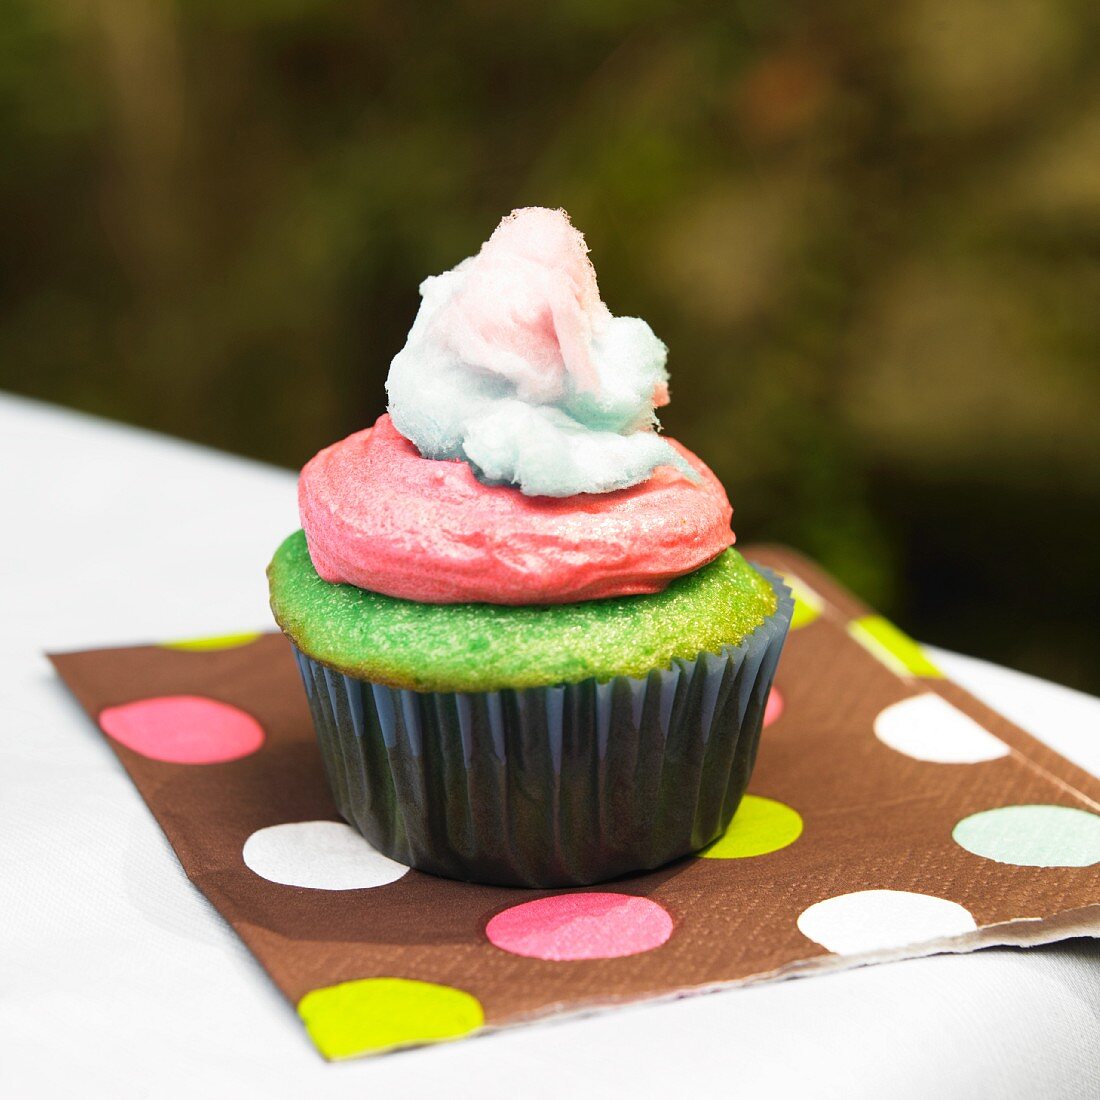 Green Cupcake with Pink Frosting and Cotton Candy on a Polk-a-Dot Napkin